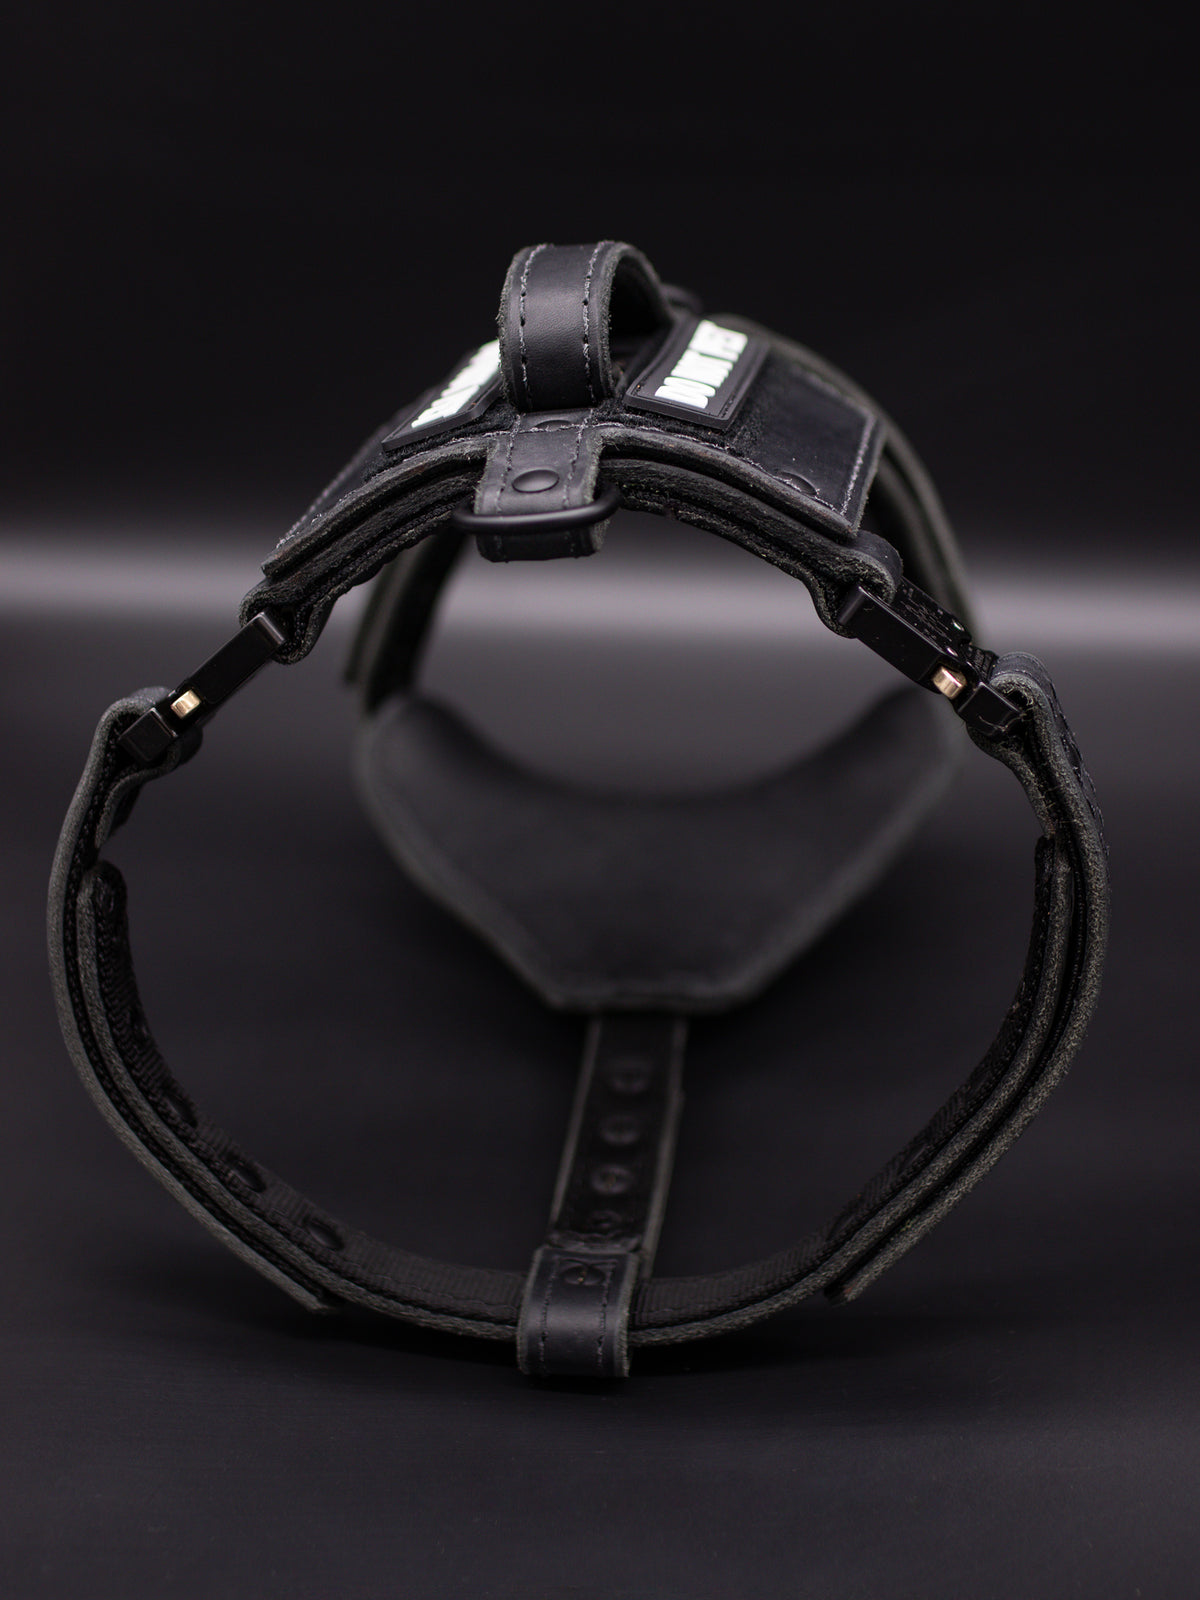 The Renegade Harness V2